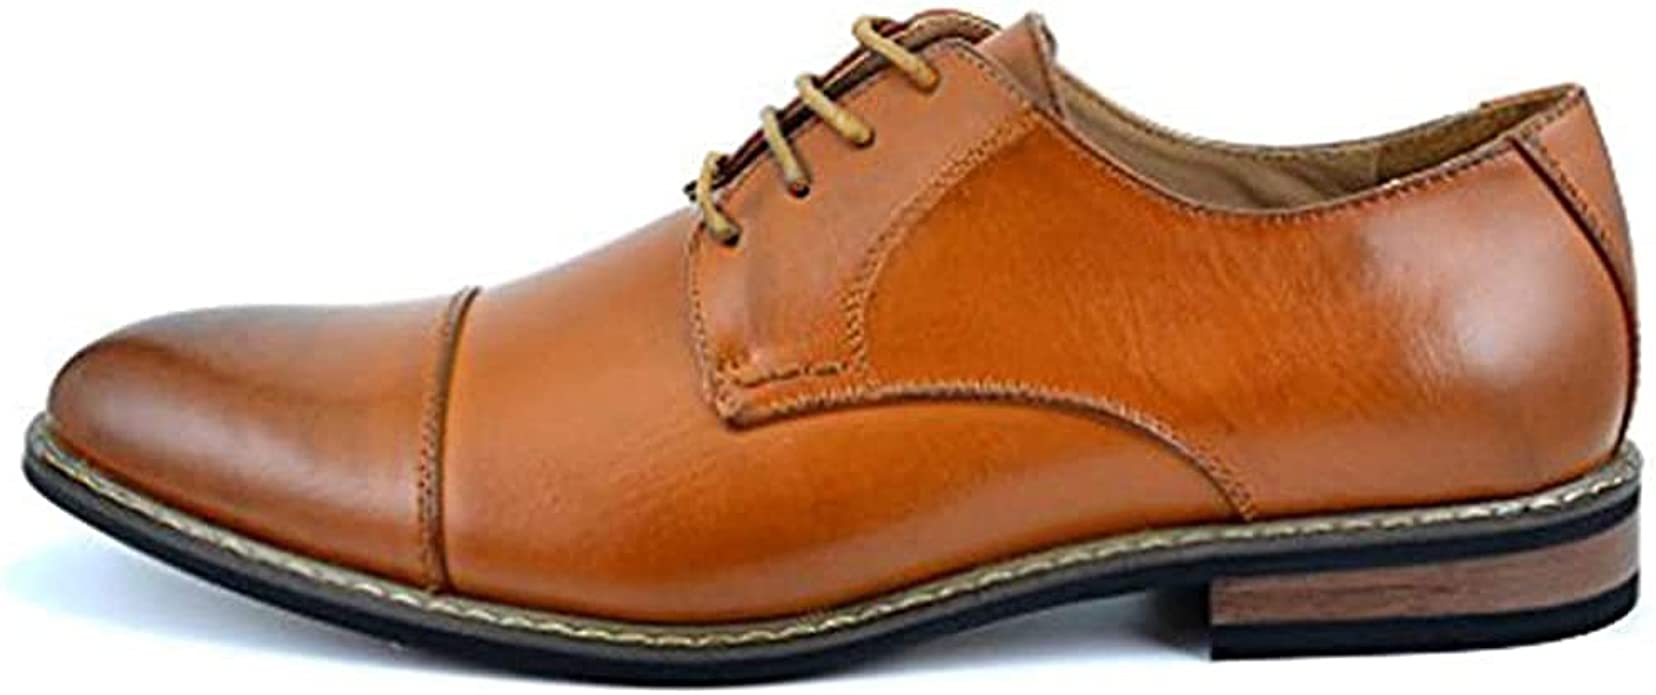 TYPES OF SOLES FOR MENS DRESS SHOES – peoplesprideshoes